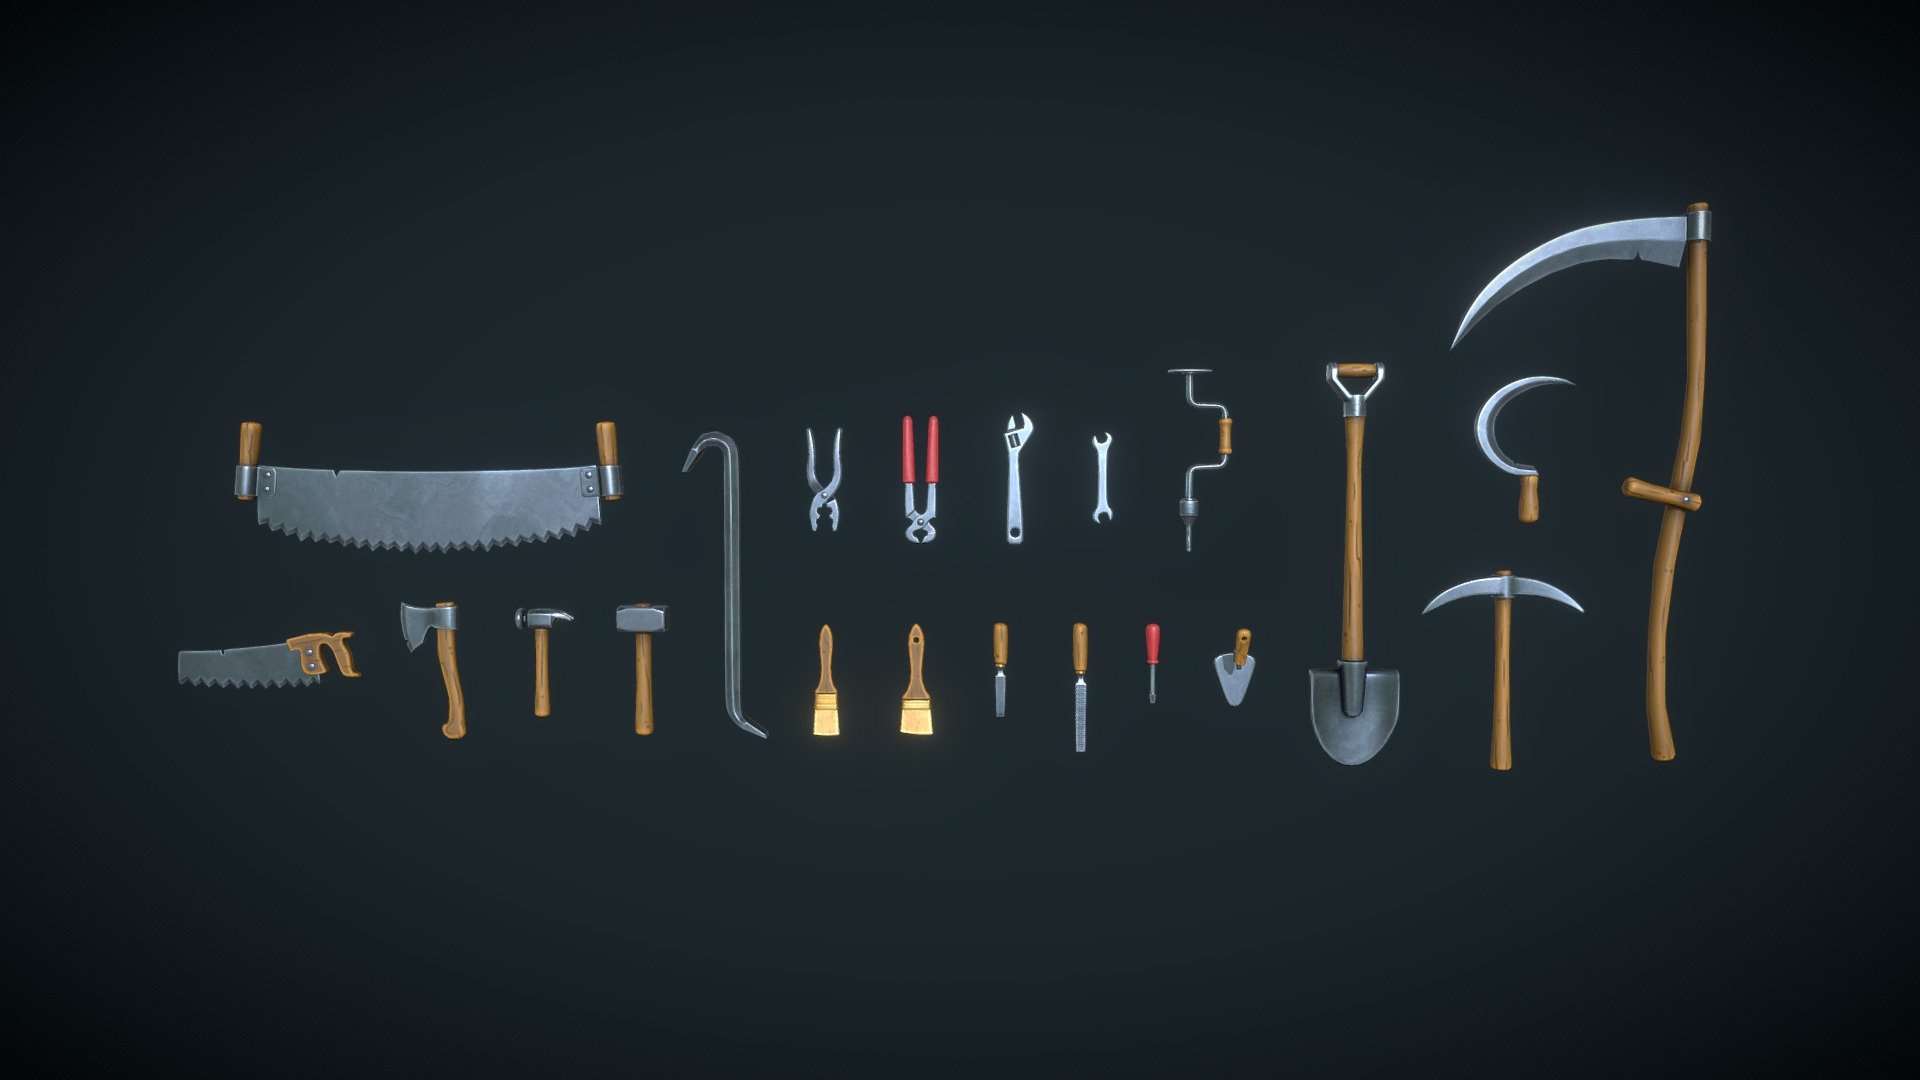 The set includes: an axe, two types of brush, a chisel, a file, two types of wood saws, a crowbar, claw hammer and sledge hammer, pincers, pliers, two types of wrenches, a screwdriver, a drill, a trowel, a shovel, a pickaxe, a sickle and a scythe.

Texture size: 4096x4096 Including maps: Base Color, Roughness, Metalness, Normal

Lowpoly, gameready - Stylized Set: Tools - Buy Royalty Free 3D model by Mamo3D 3d model